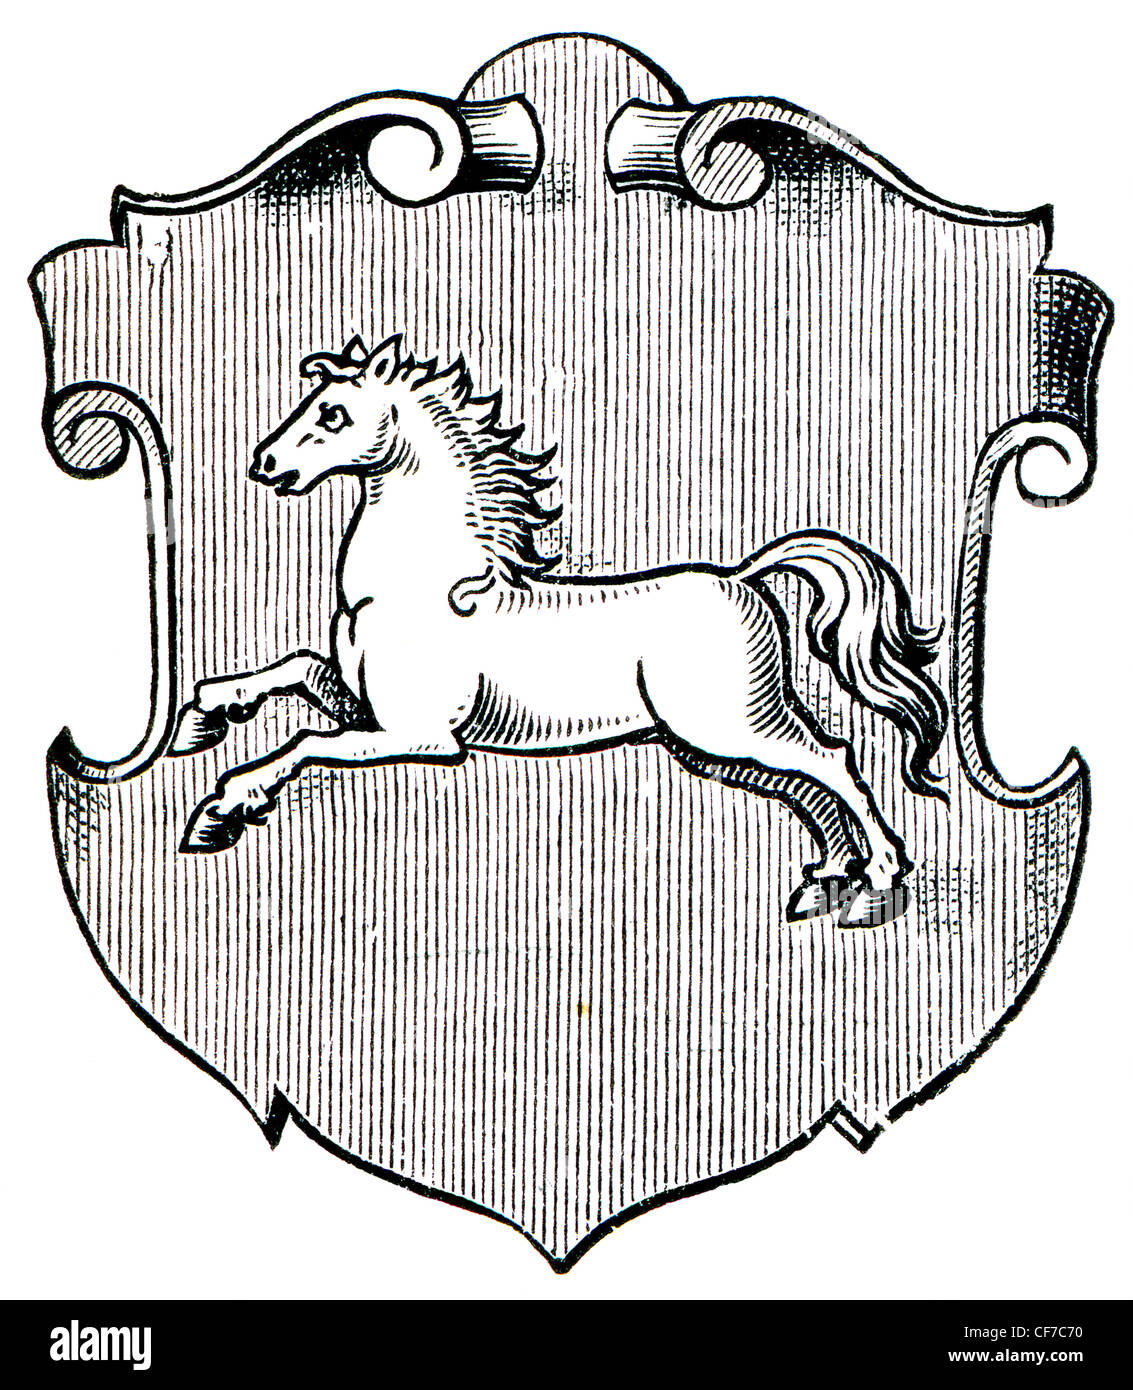 Coat of Arms Hanover Stock Photo